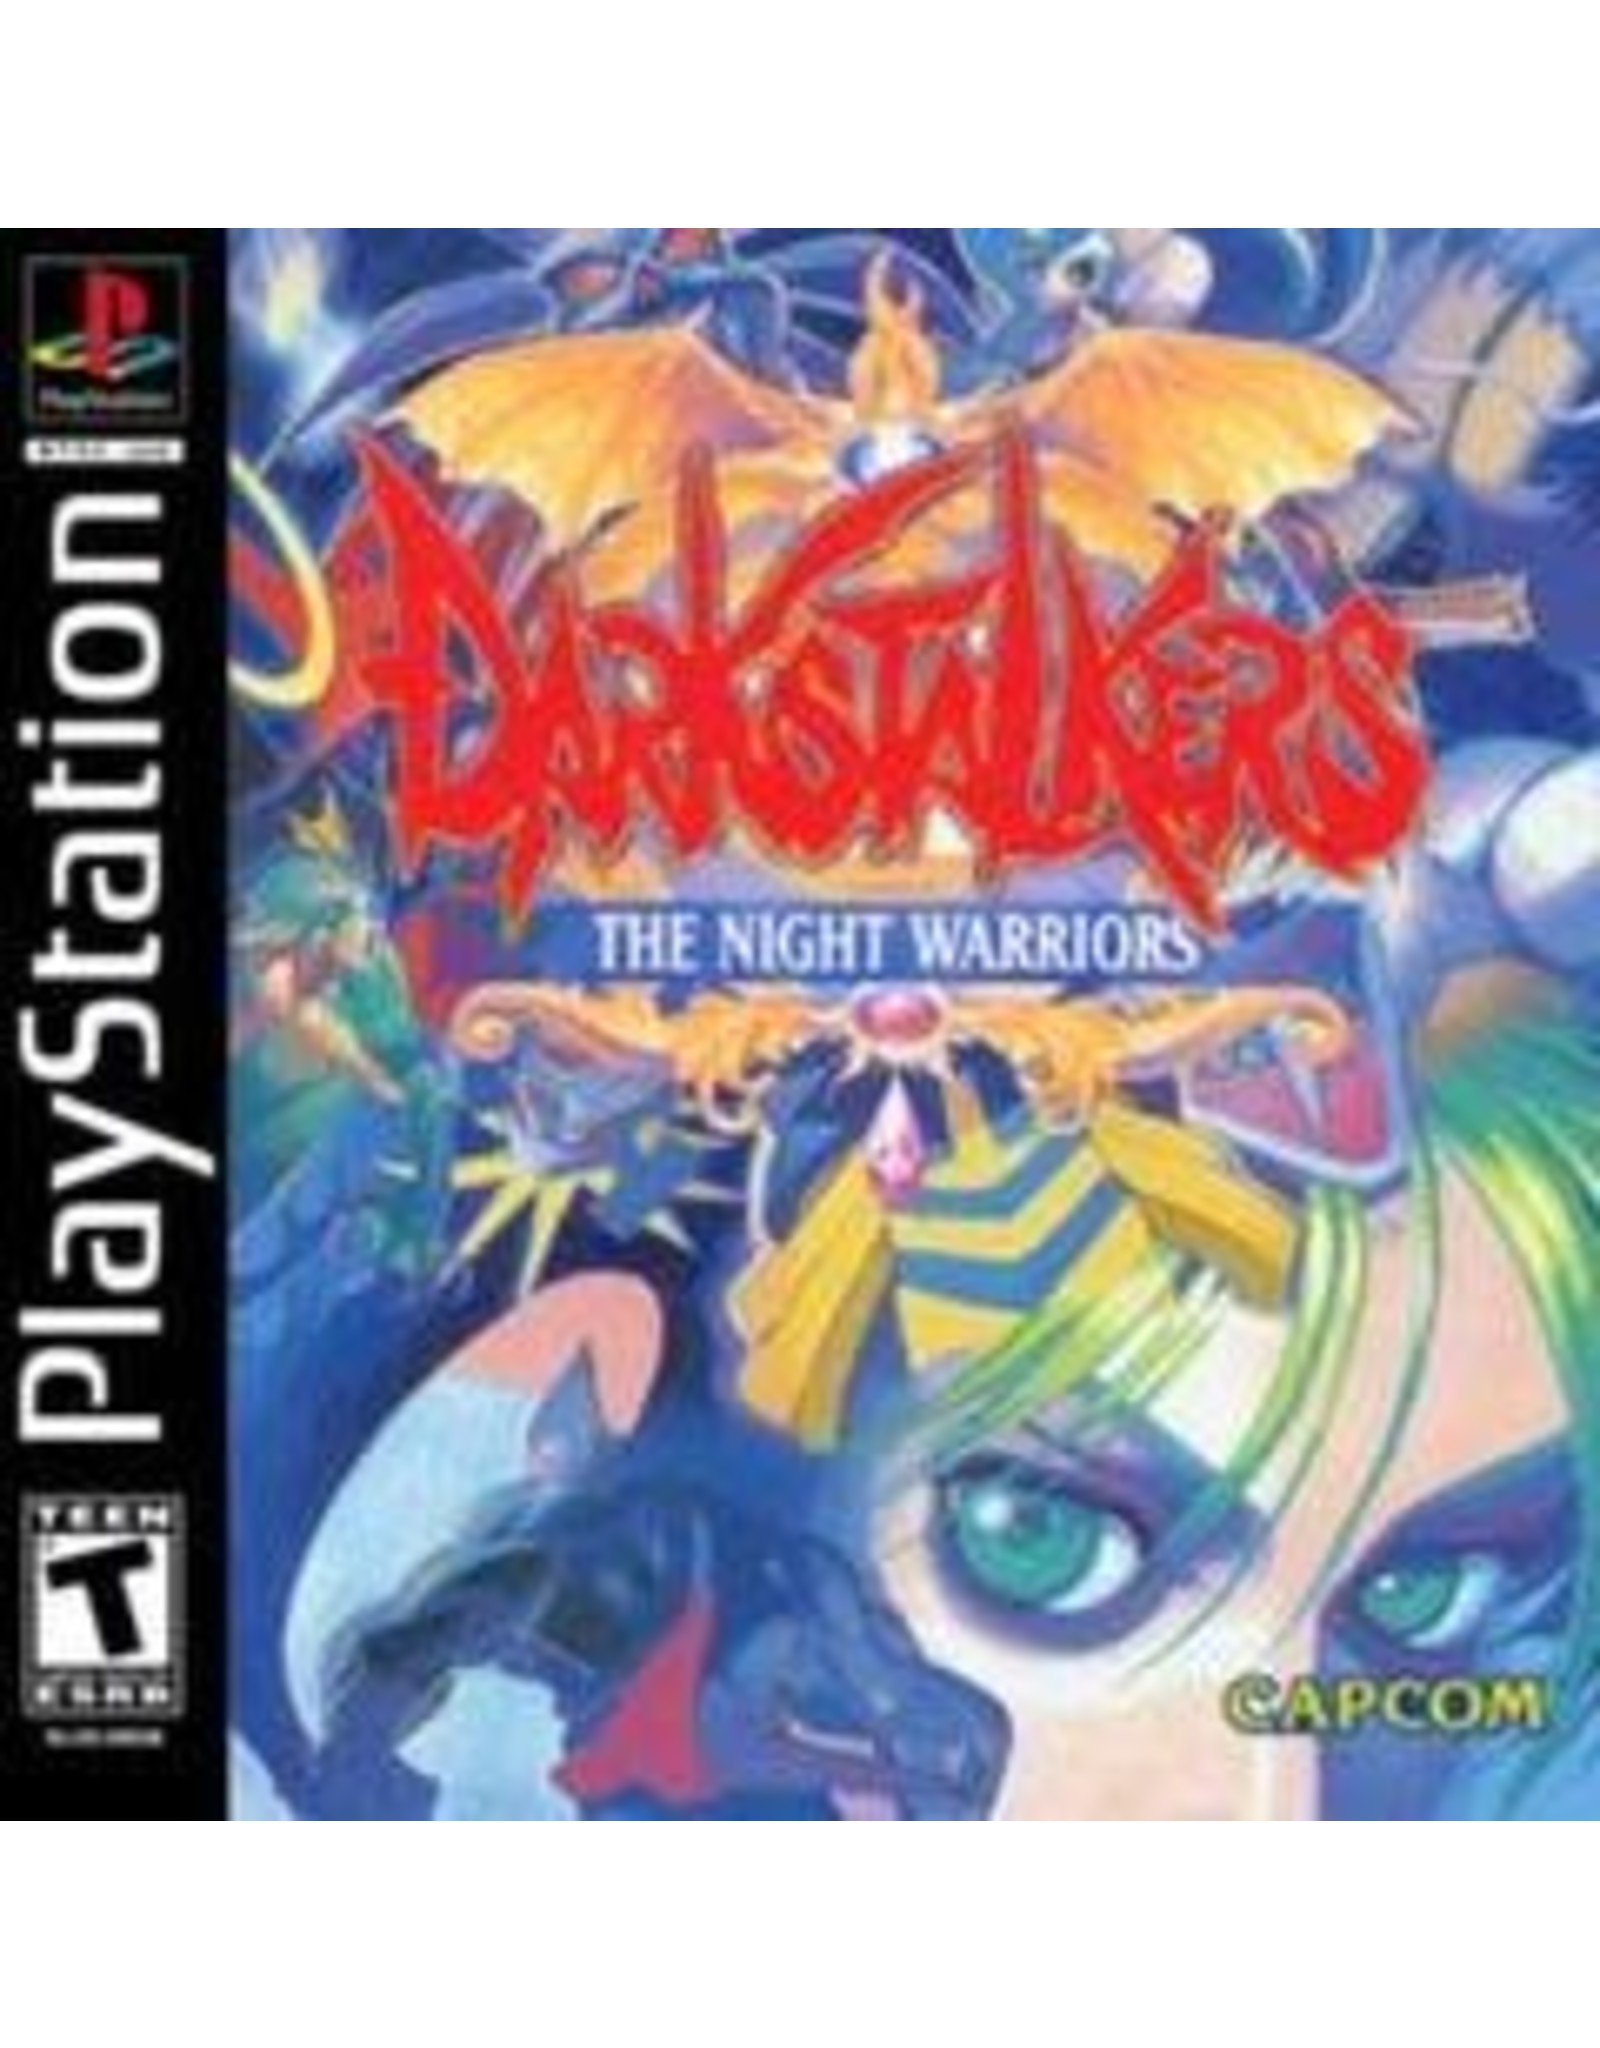 Playstation Darkstalkers The Night Warriors (Disc Only, Sticker On Disc)